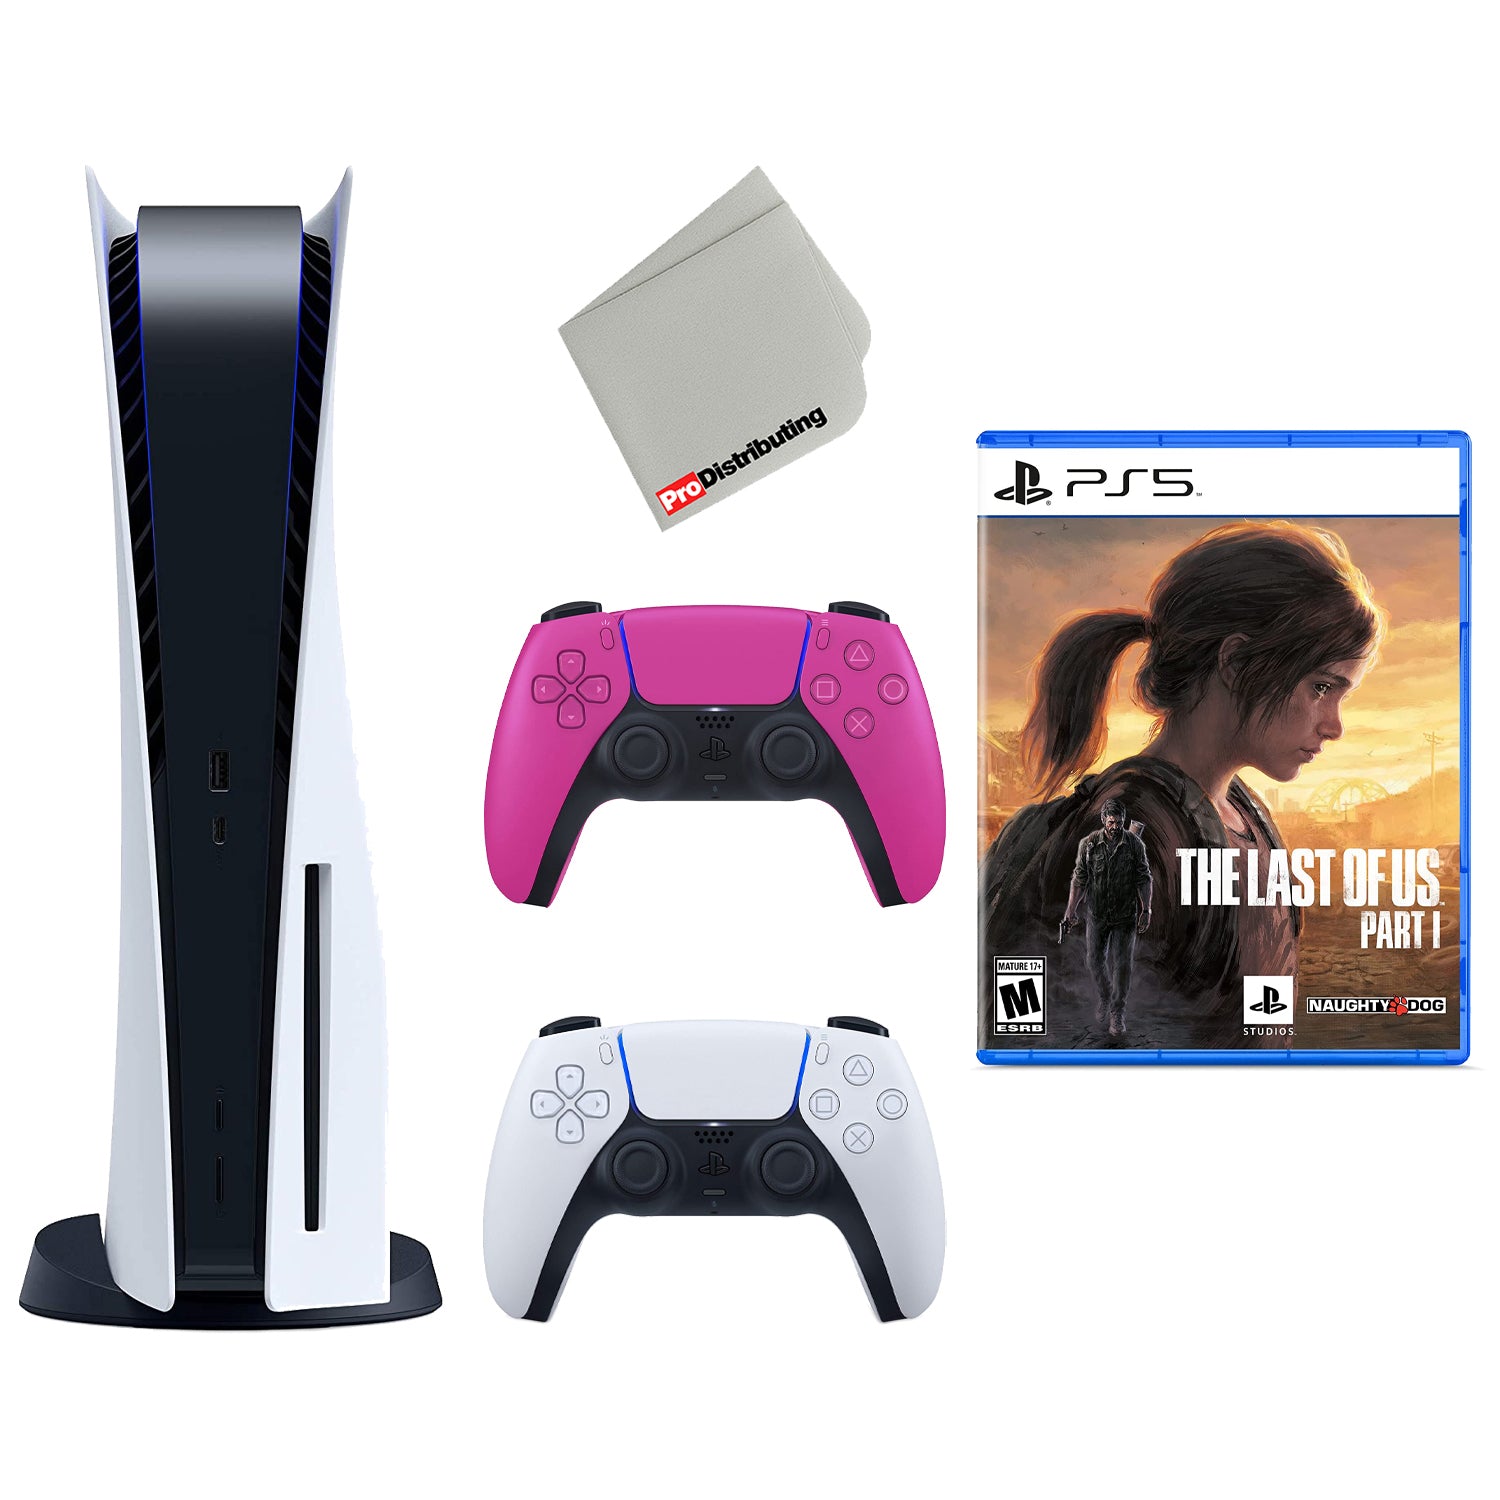 Sony Playstation 5 Disc with The Last of Us Part I, Extra Controller and Microfiber Cloth Bundle - Nova Pink - Pro-Distributing